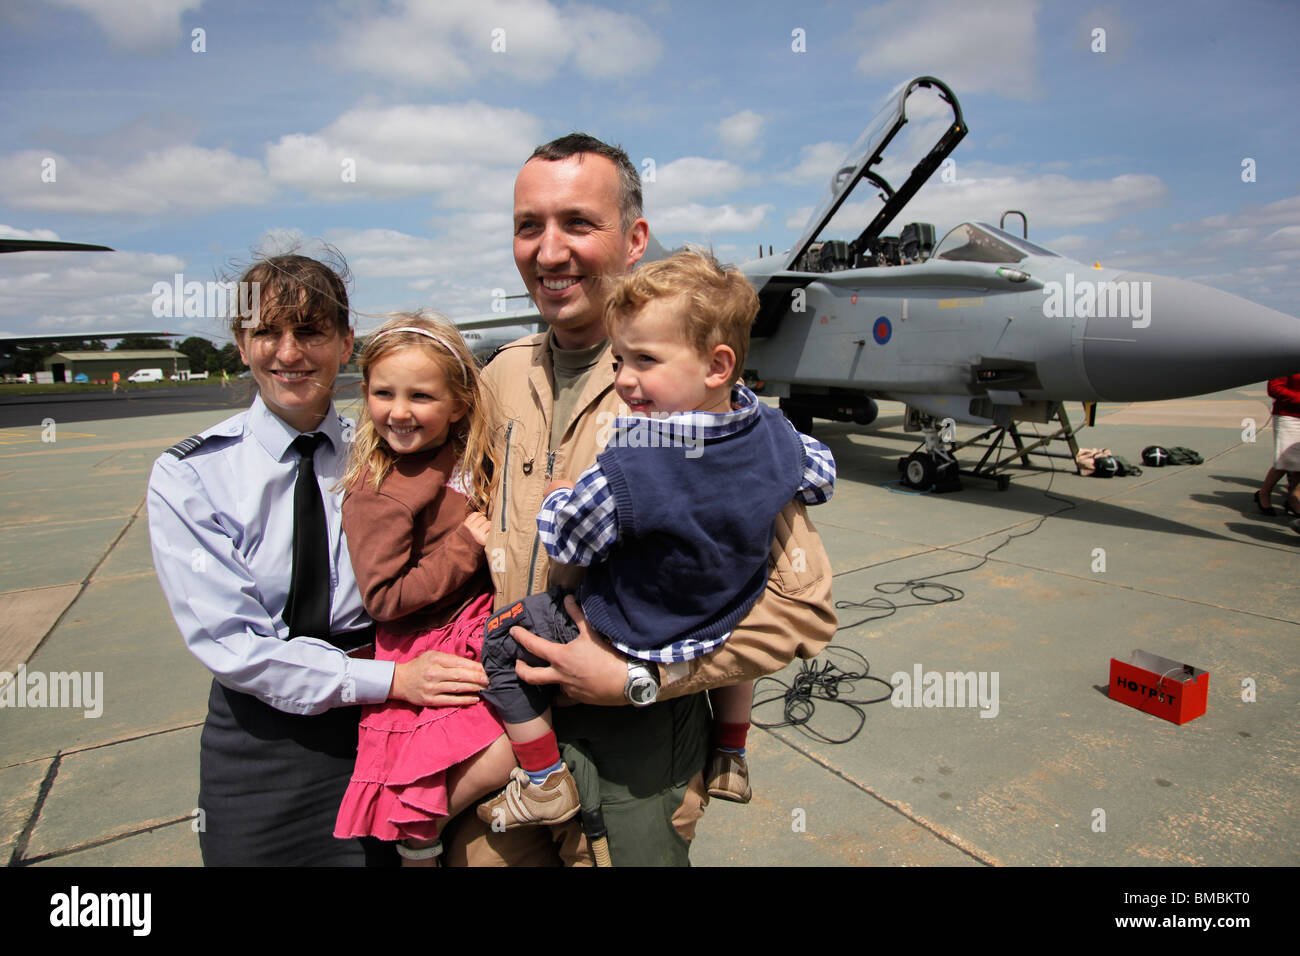 Sqn Ldr Nathan Giles, Holly Giles, Edward Giles & wife Sqn Ldr Anne Giles pose together after being reunited at RAF Marham. Stock Photo